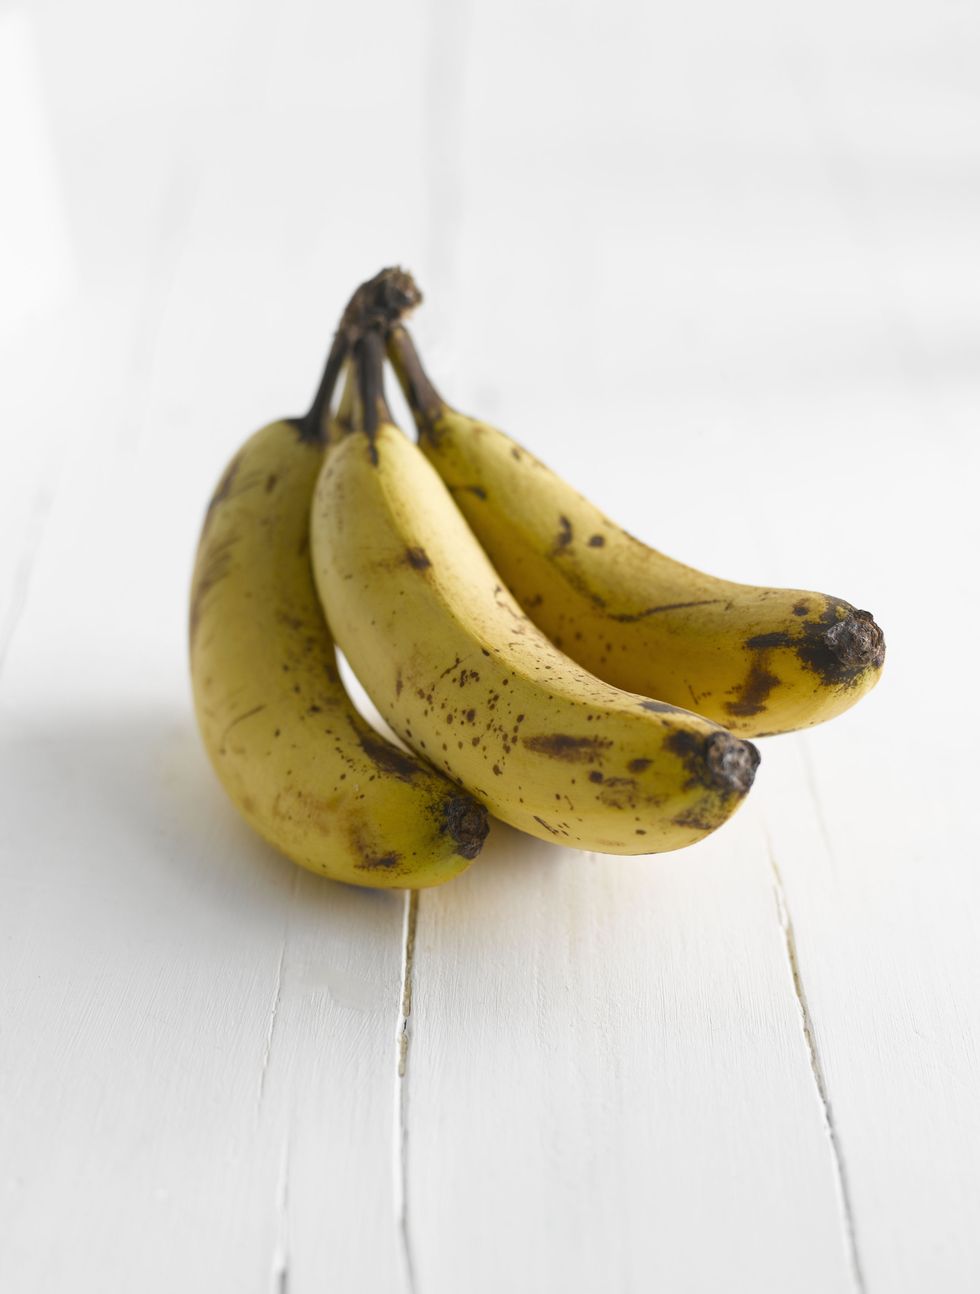 Banana bread lovers may know this secret well. Freezing ripe bananas is a game-changer for all your last minute banana baked good needs. They're also terrific for adding to smoothies since it makes them creamier and you can use less ice.